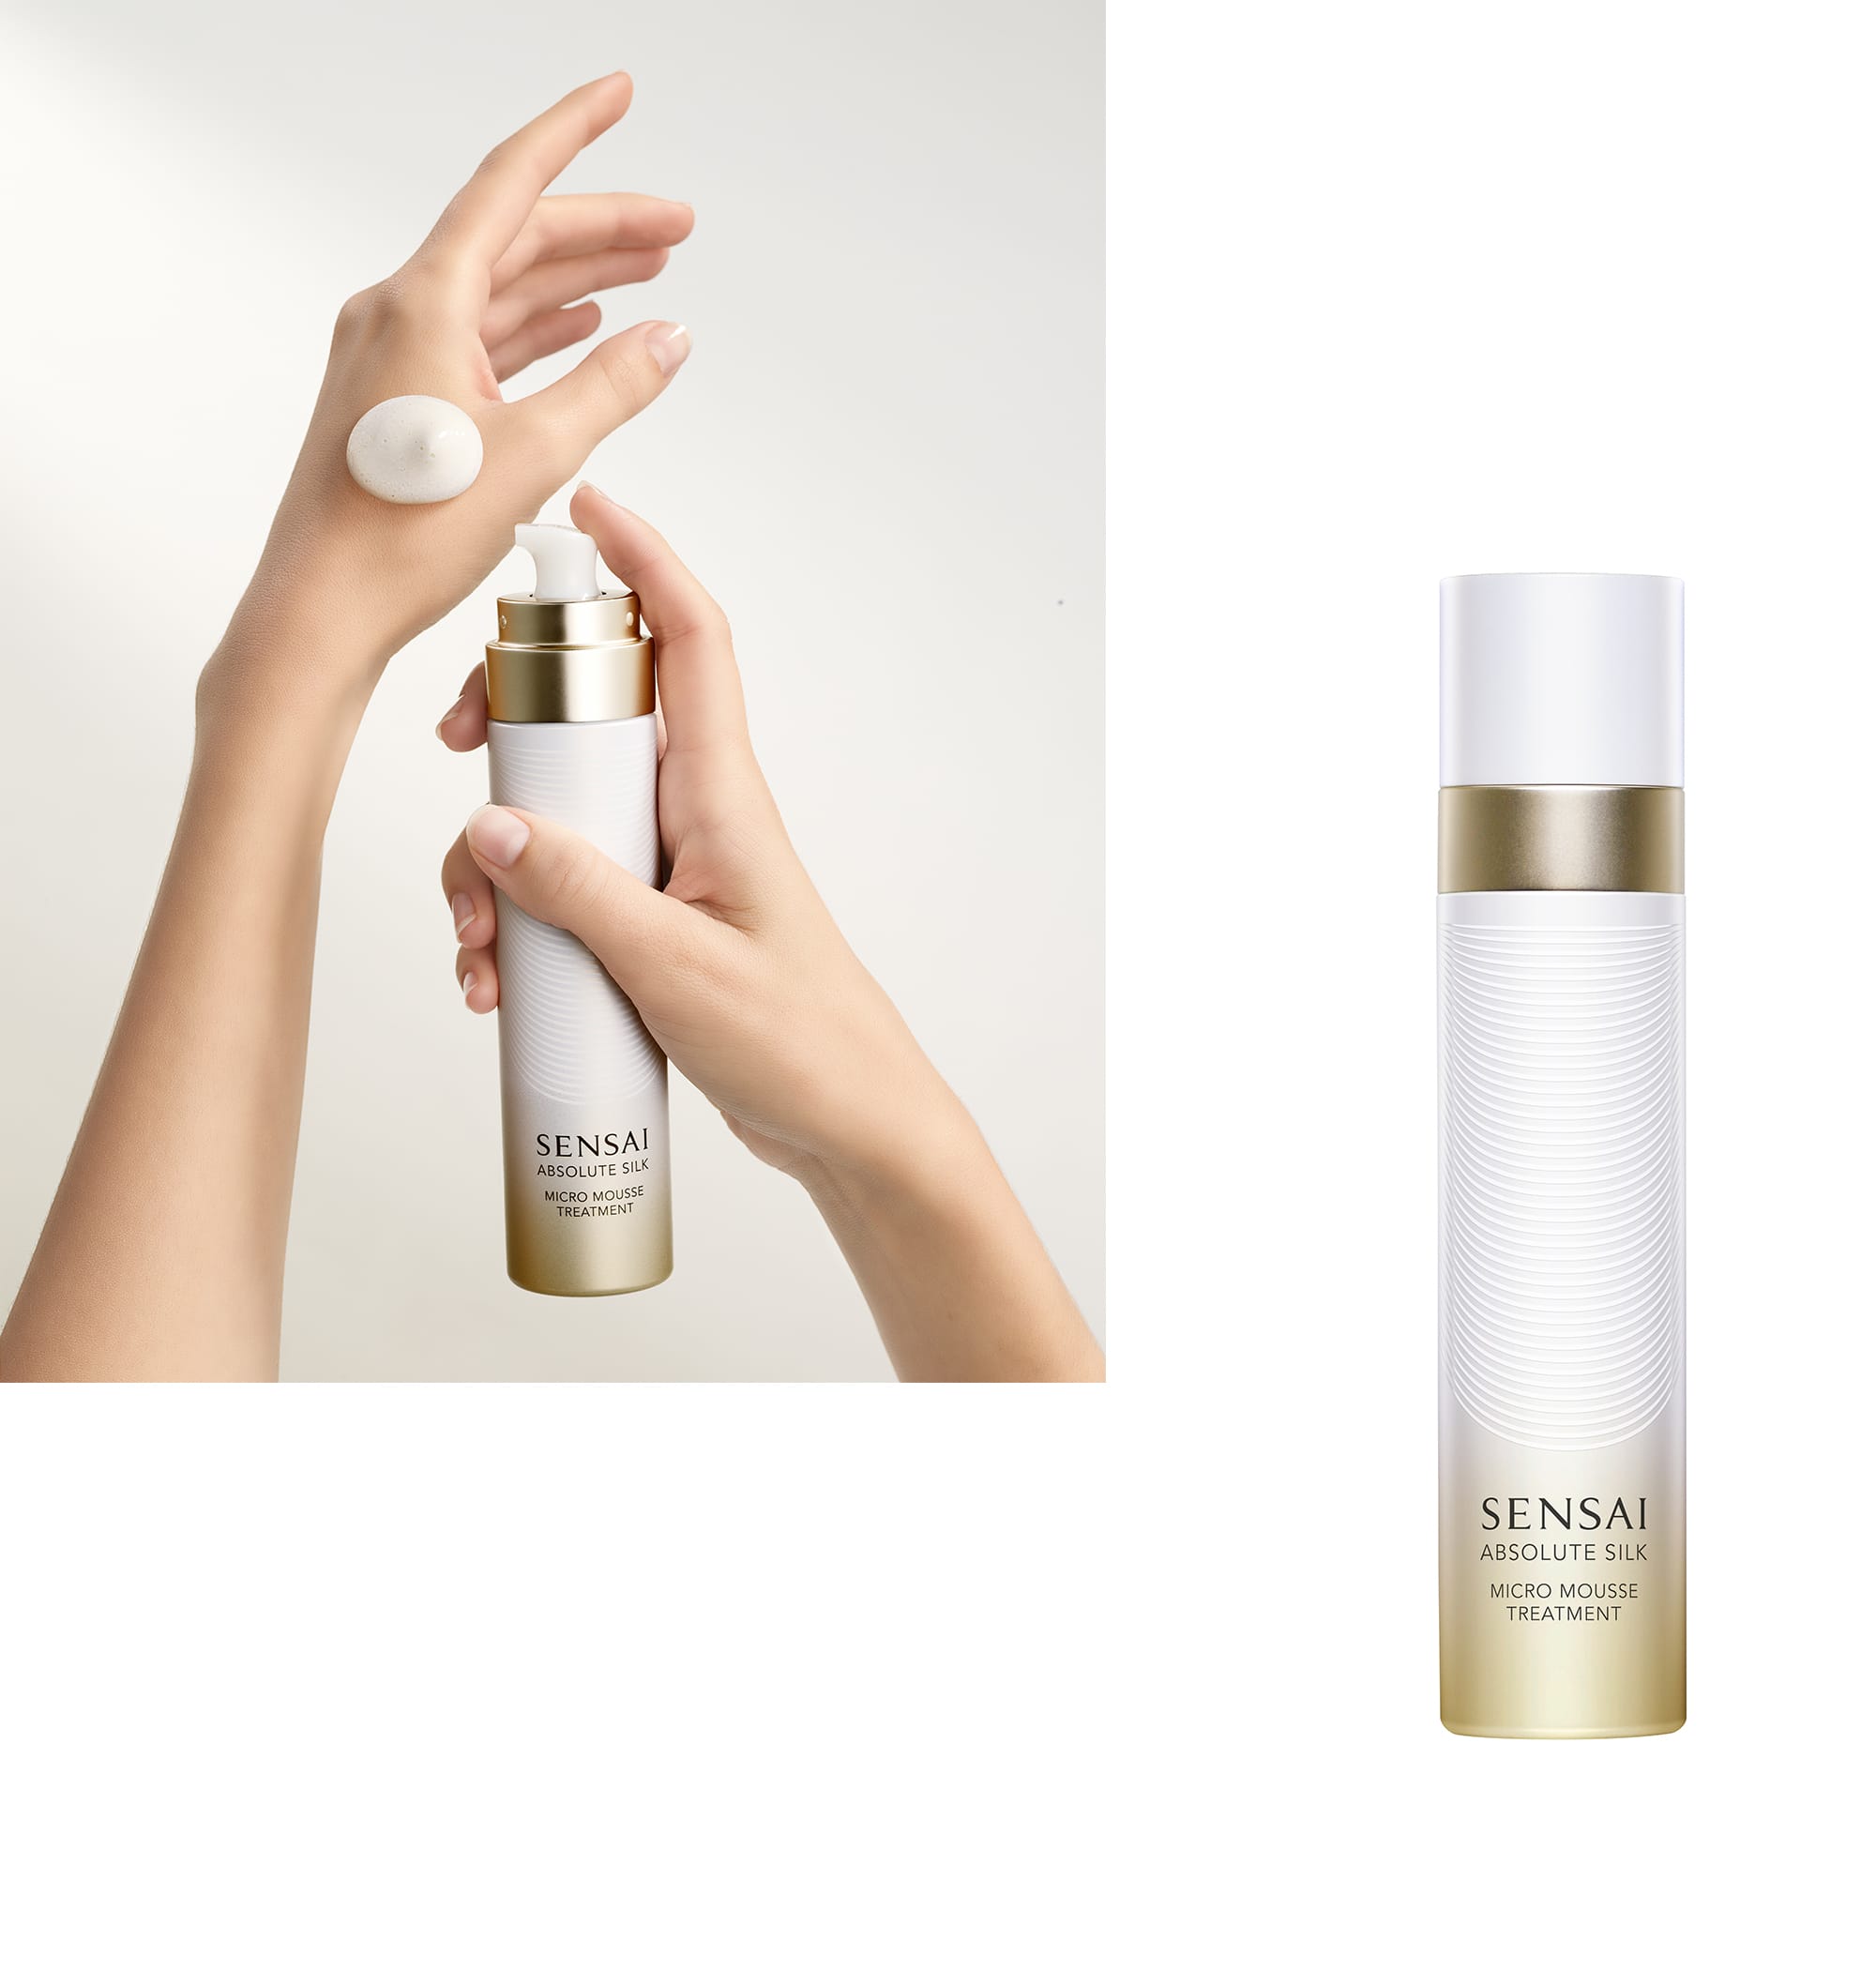 SENSAI AS Micro Mousse Treatment [Skin Lotion] 90ml 18,000 Yen (Tax is not included). This foaming skin lotion resembles a silk cocoon. By hand pressing the lotion foam onto the skin, the lotion spreads, melts and effervesces into the skin.